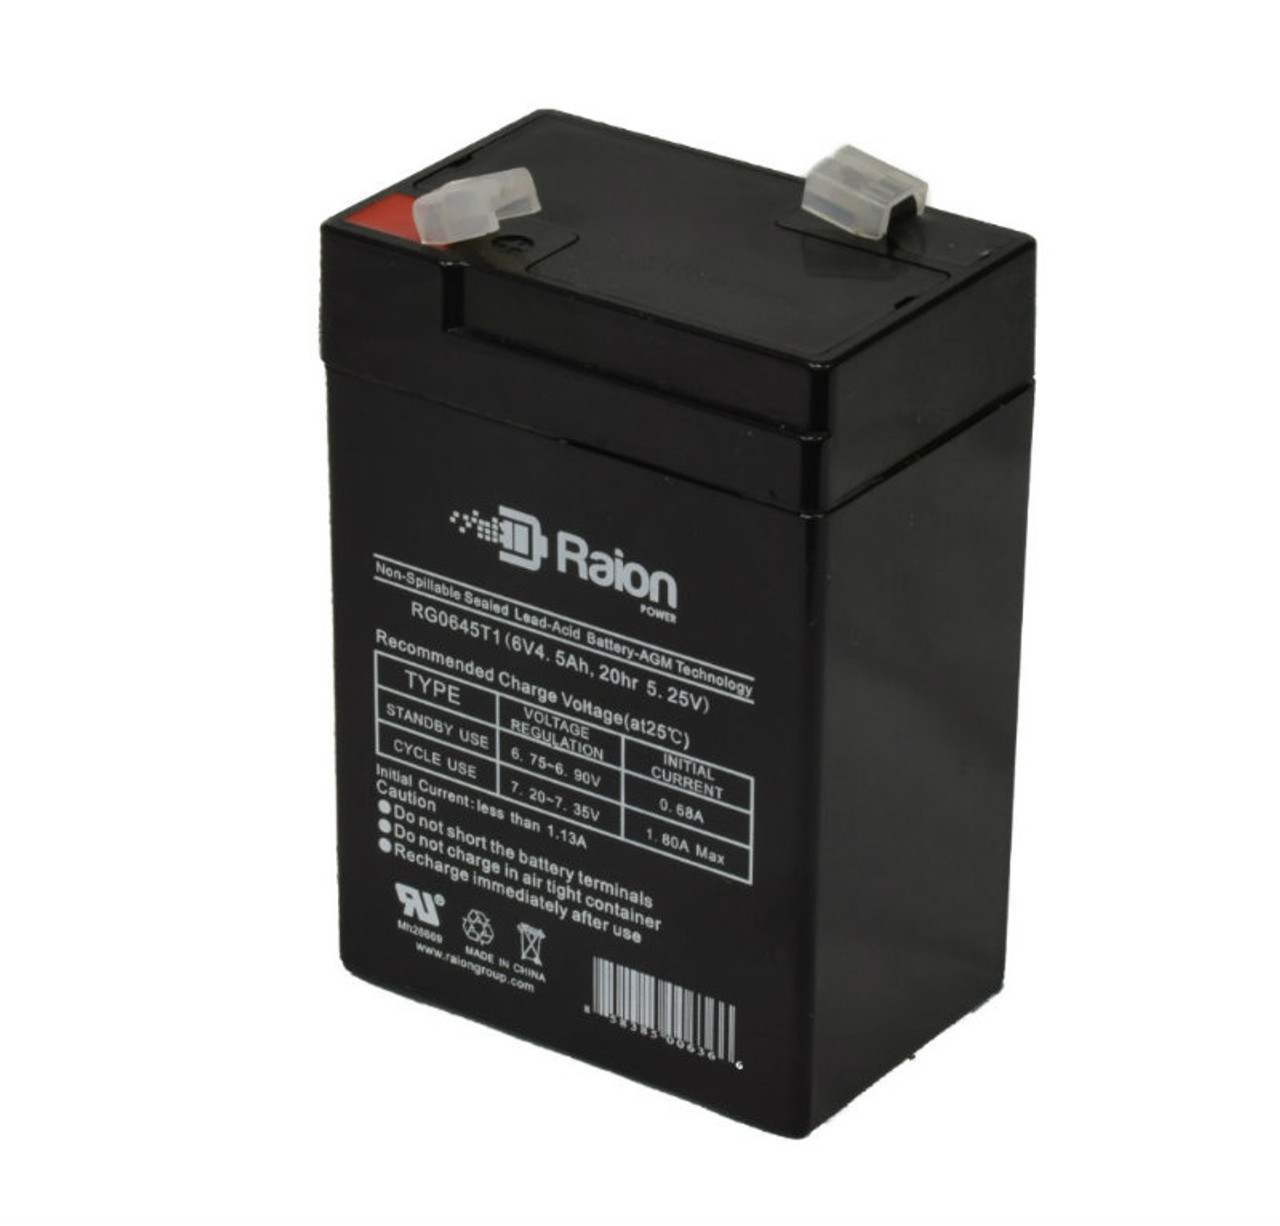 Raion Power RG0645T1 6V 4.5Ah Replacement Battery Cartridge for Himalaya 3FM3.5S